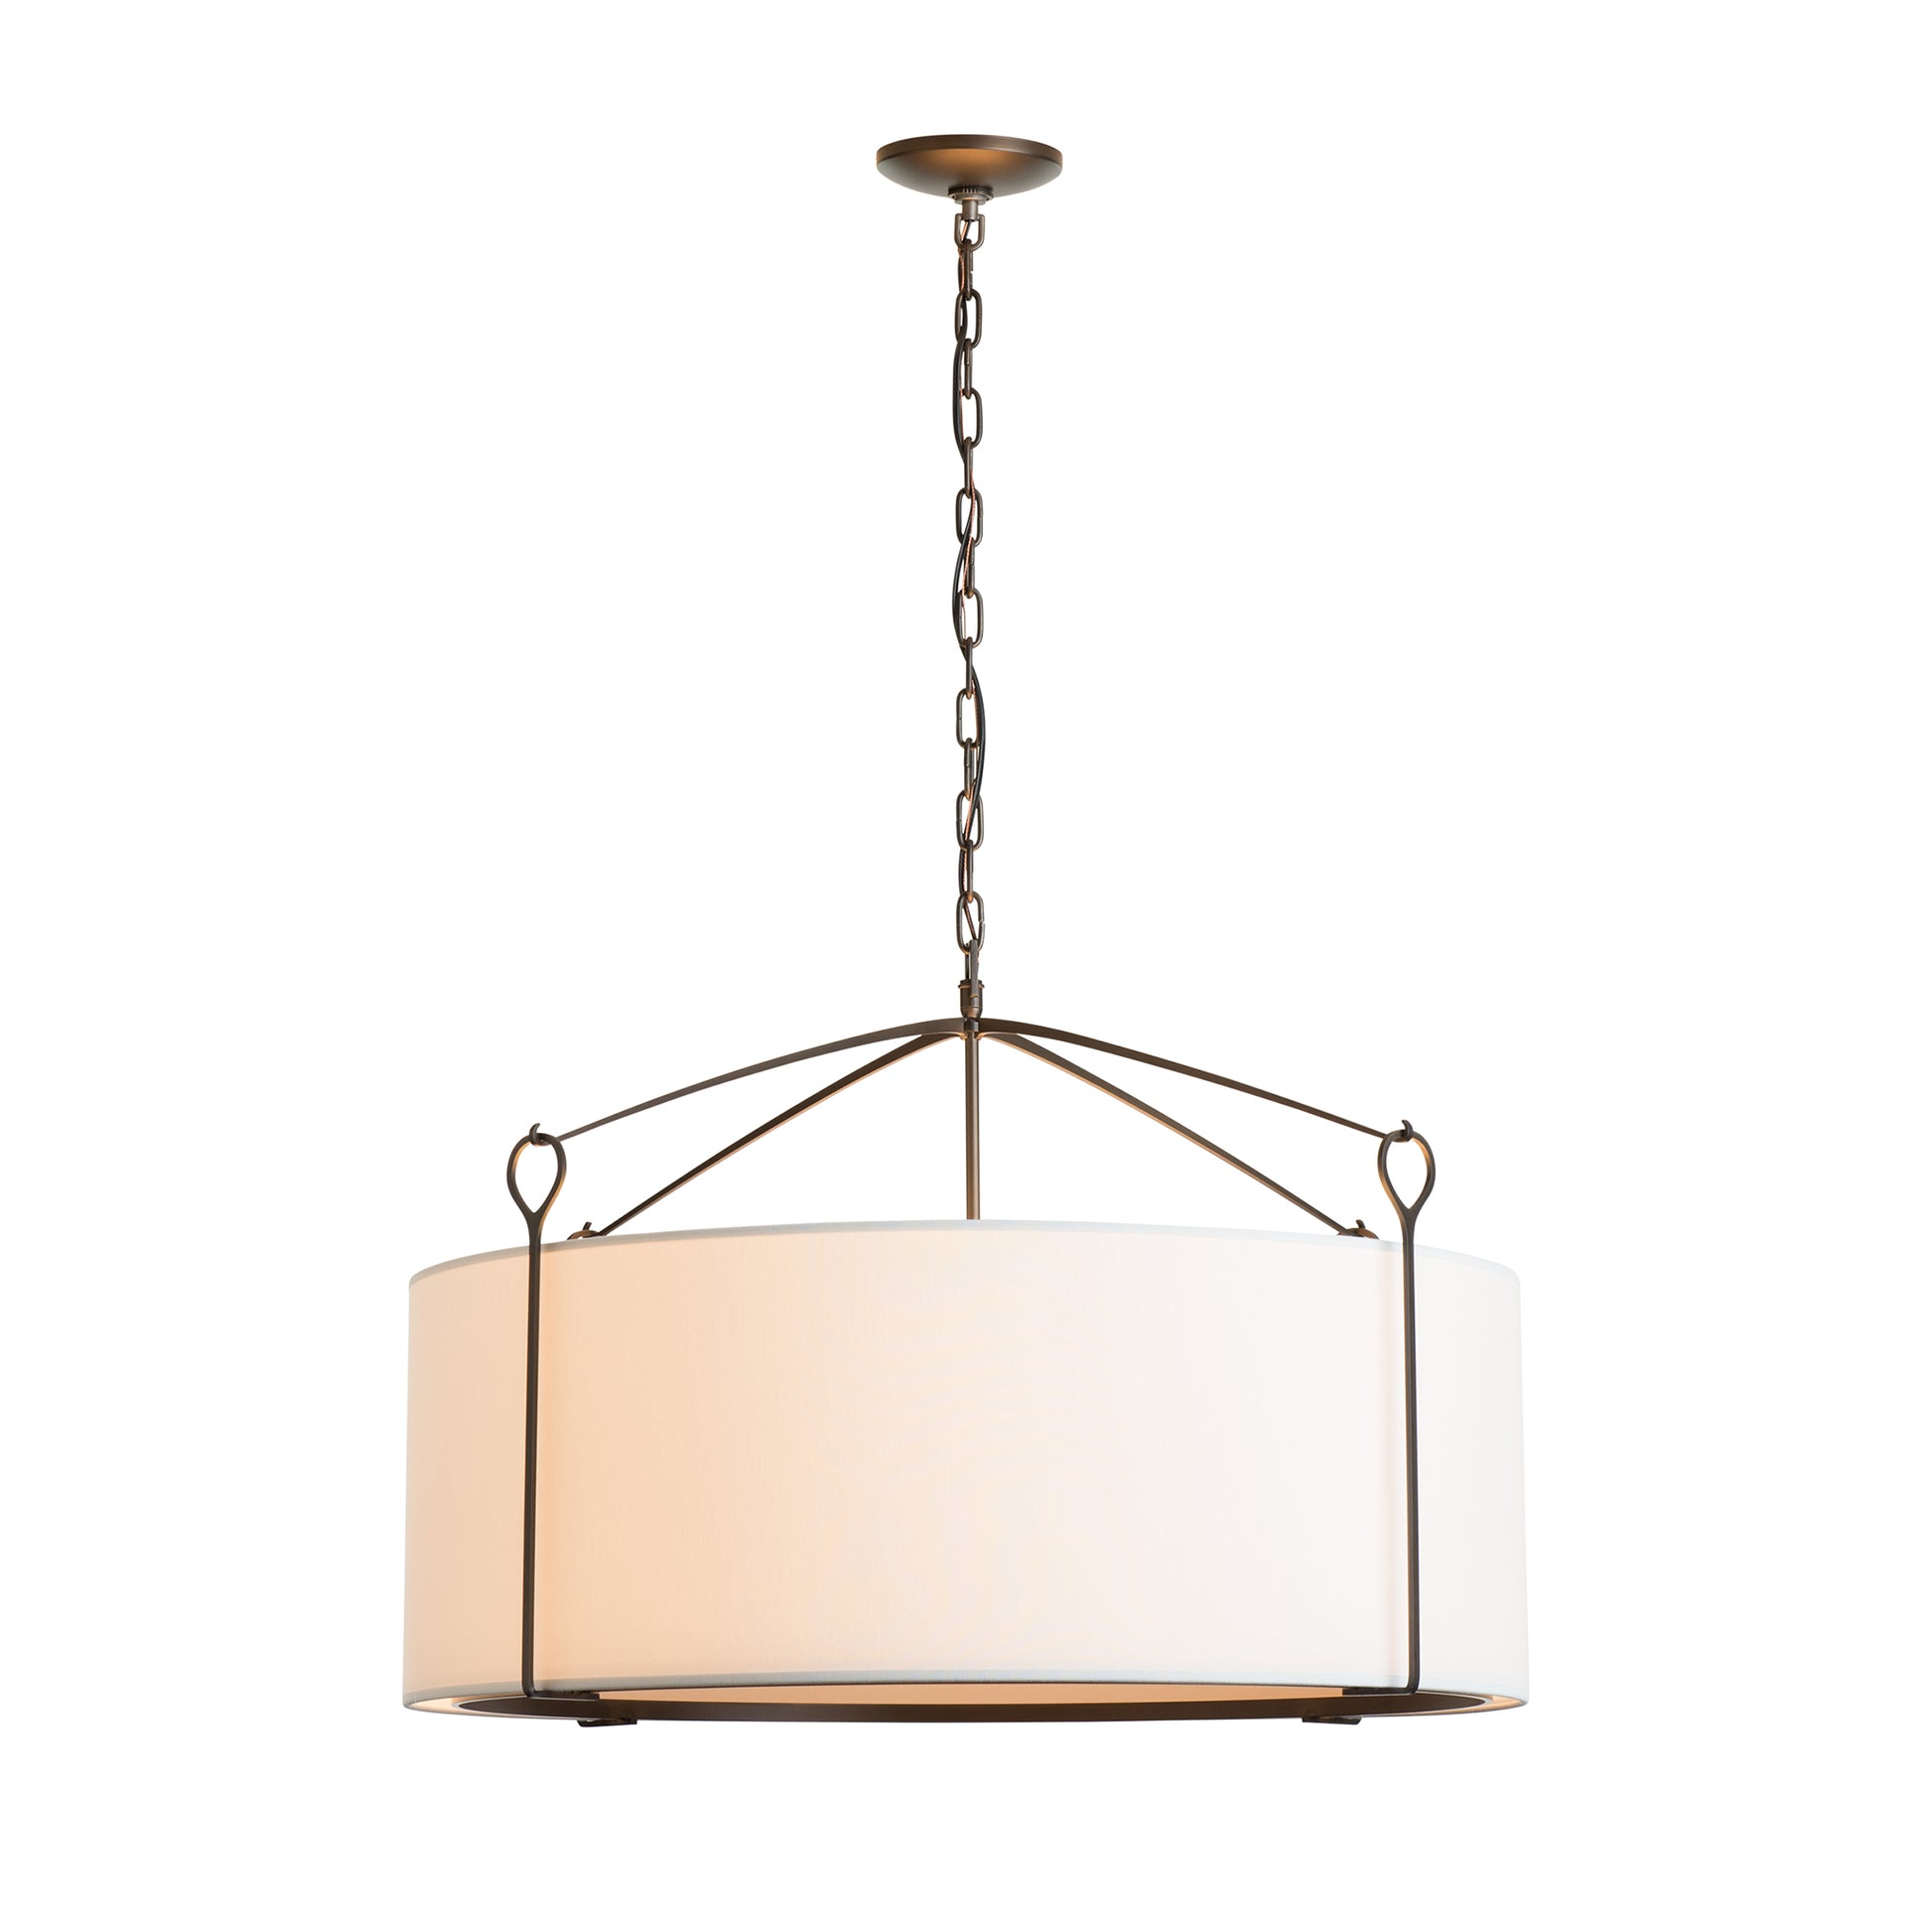 A modern Bow Large Pendant with a white drum shade and an antique bronze frame, suspended by a chain from a circular ceiling mount, crafted by Hubbardton Forge.